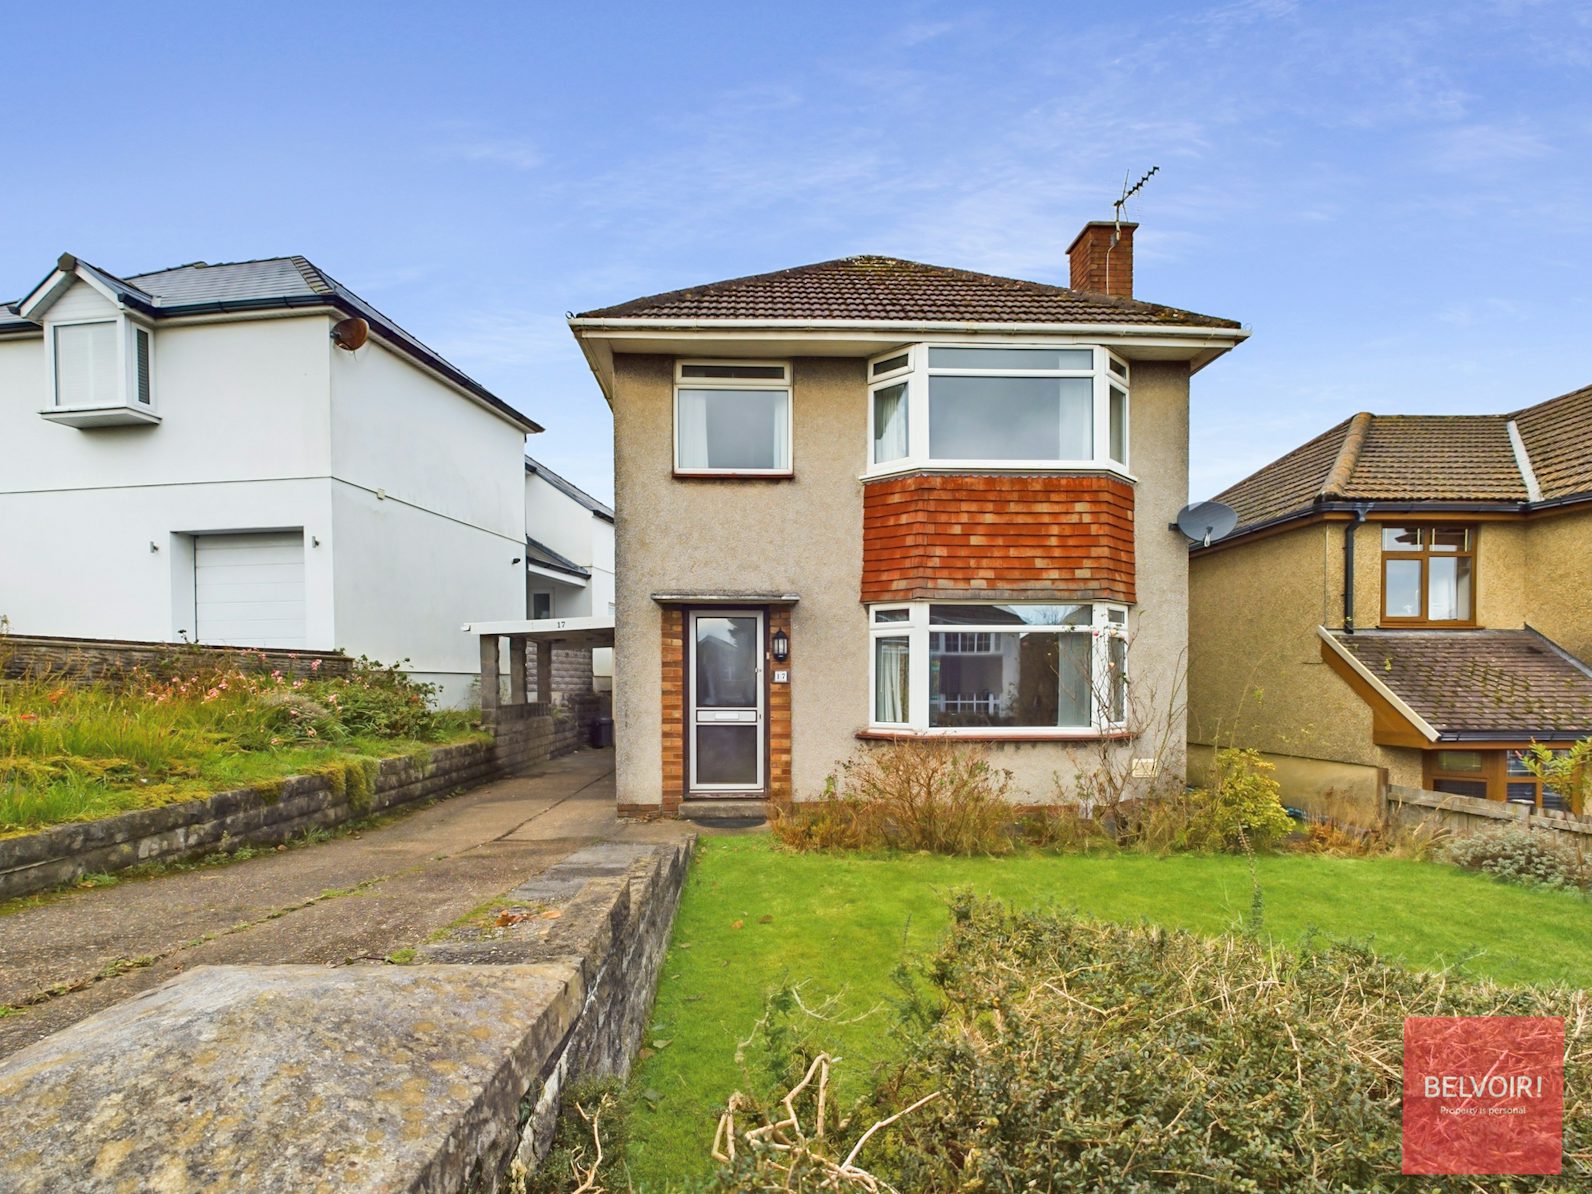 Detached House for sale on Sunningdale Avenue Mayals, Swansea, SA3